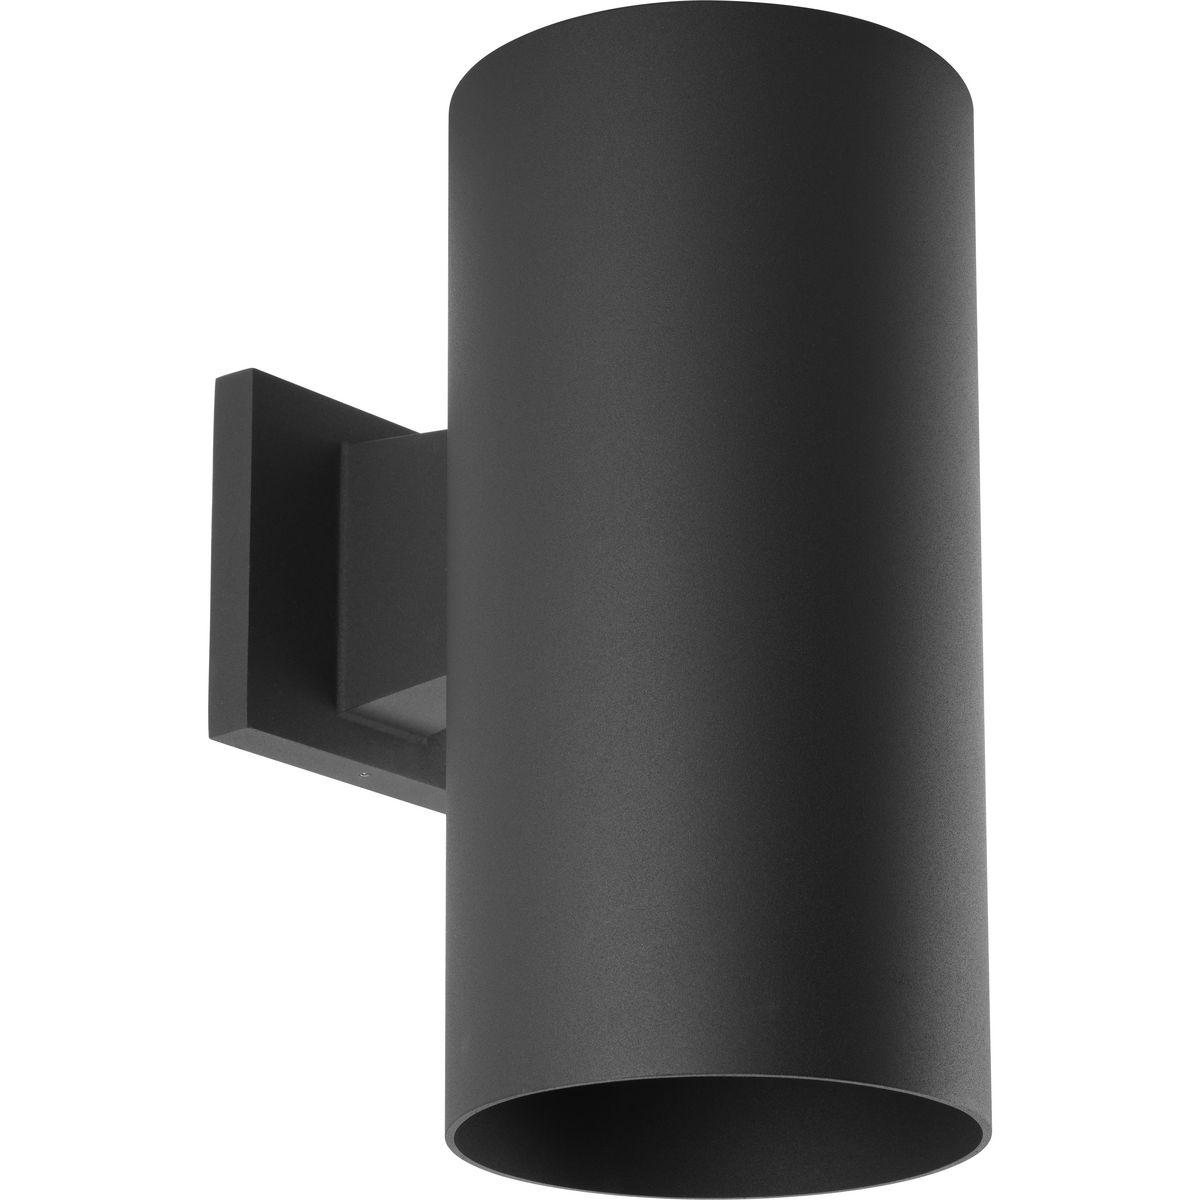 Hubbell P5641-31/30K 6" downlight wall cylinders are ideal for a wide variety of interior and exterior applications including residential and commercial. The aluminum Cylinders offers a contemporary design with its sleek cylindrical form and elegant fade and chip resistant Bl